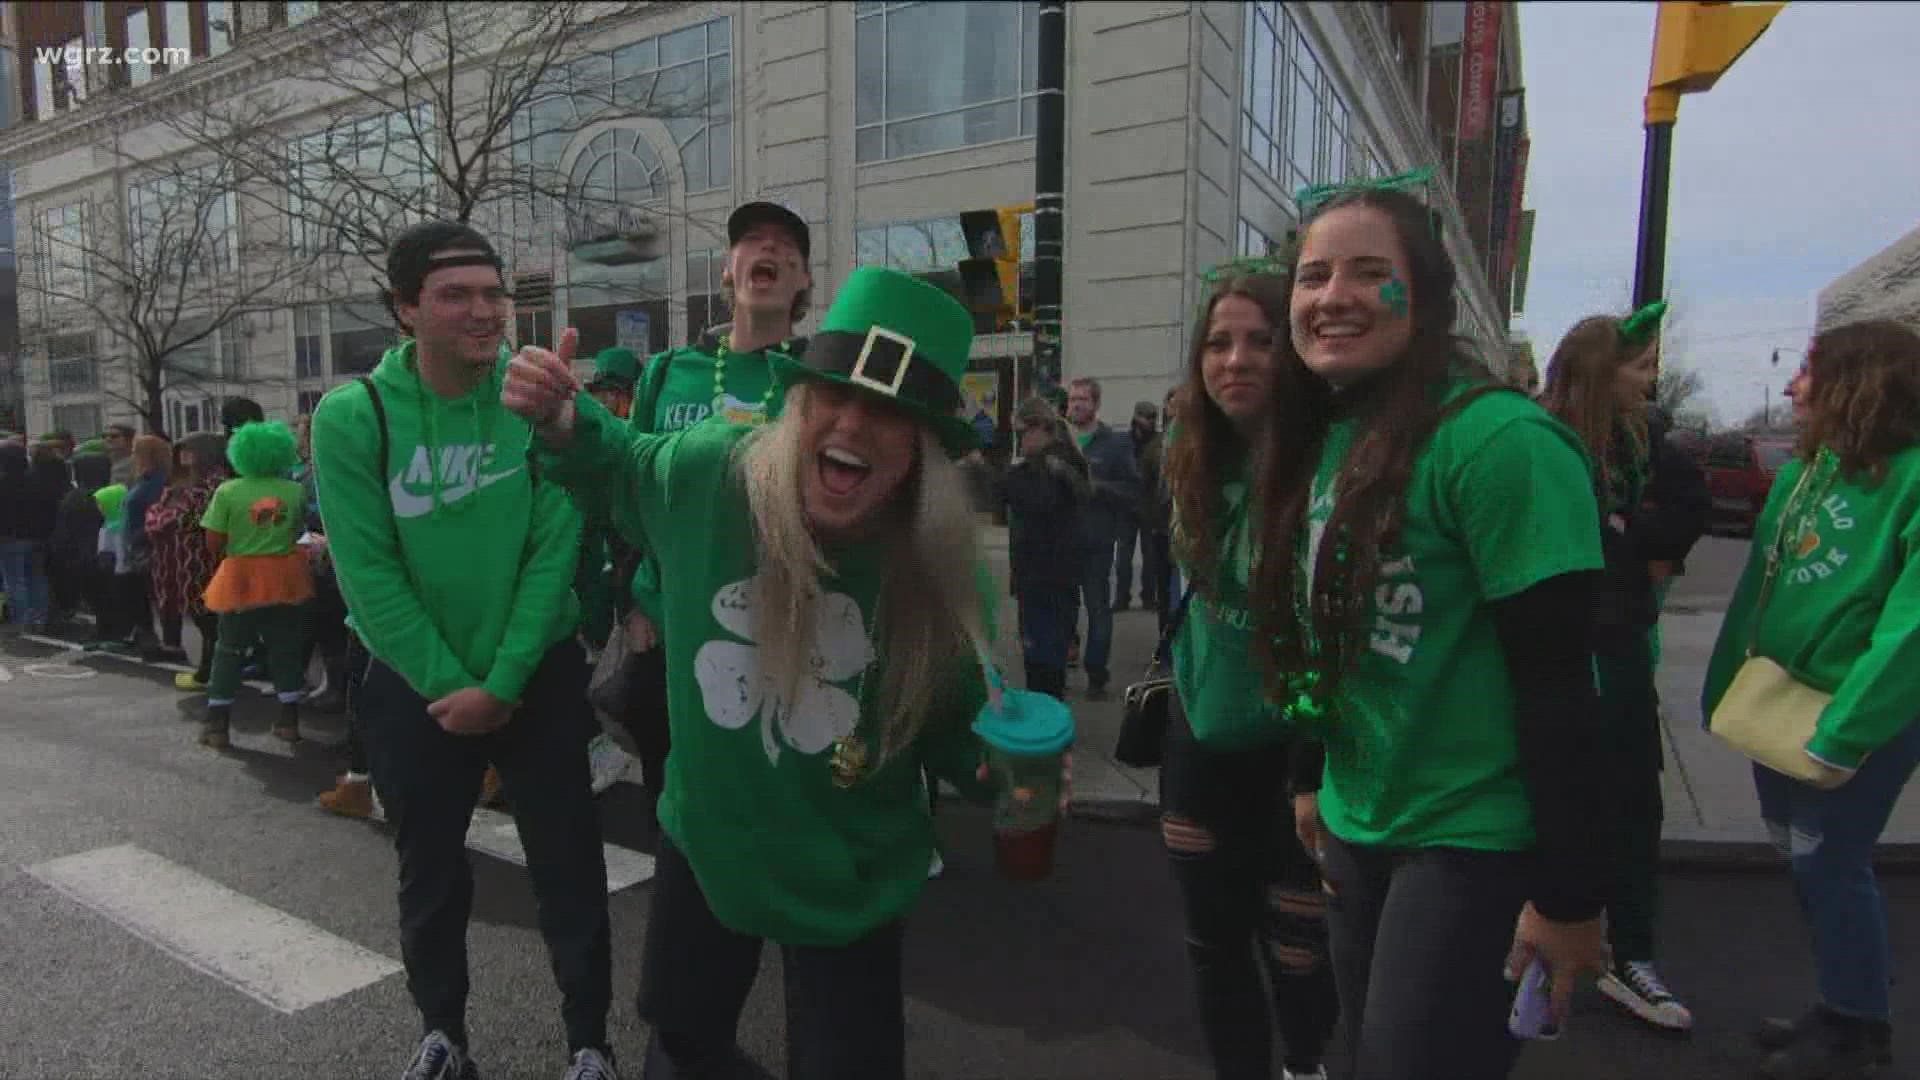 Delaware Avenue welcomed thousands of people this afternoon for Buffalo's annual Saint Patrick's Day parade!